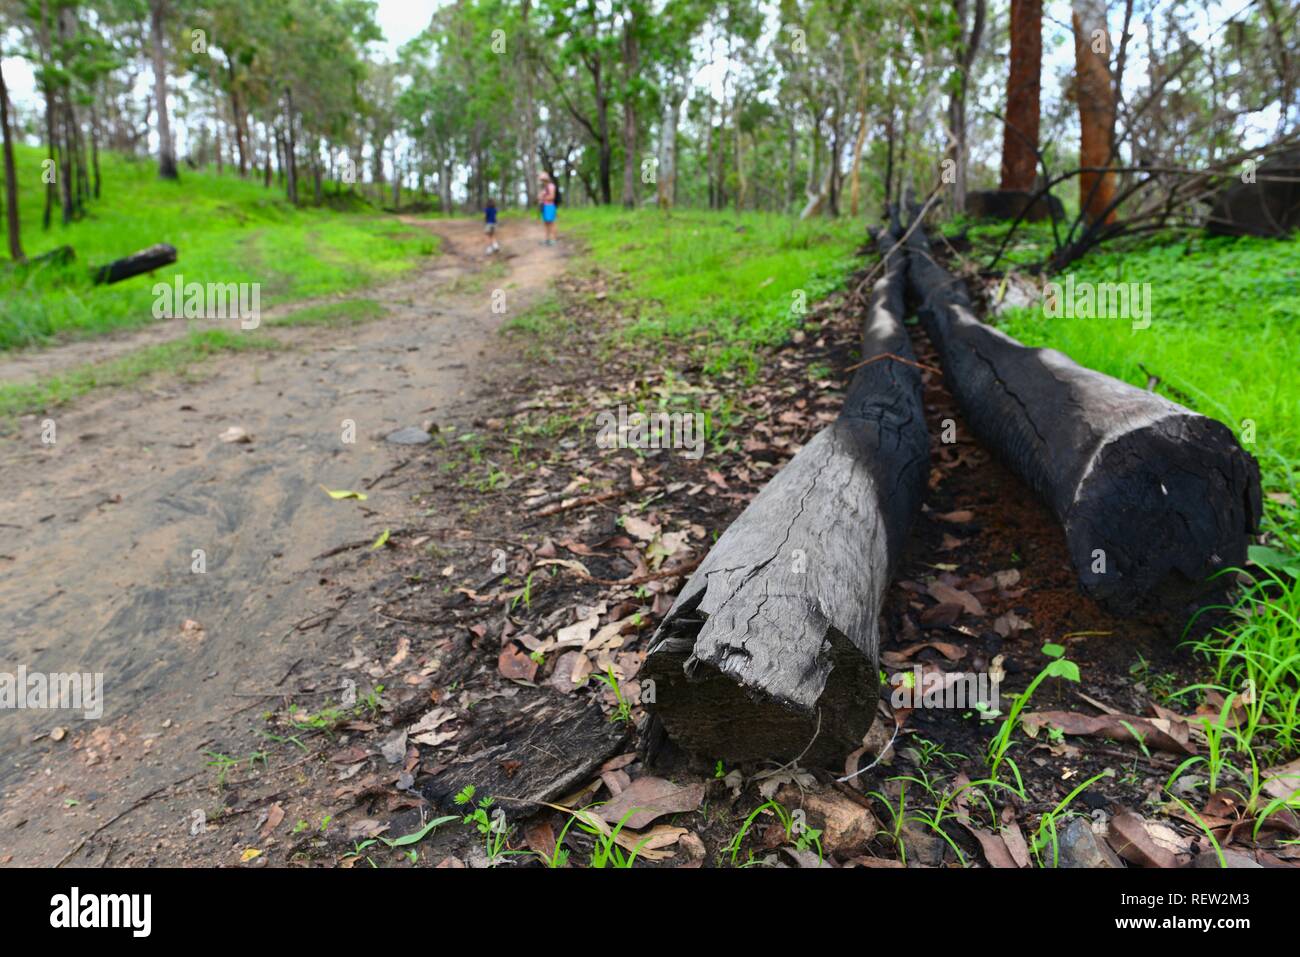 Fire damage and regrowth in Mia Mia State Forest after the November 2018 fires, Queensland, Australia Stock Photo